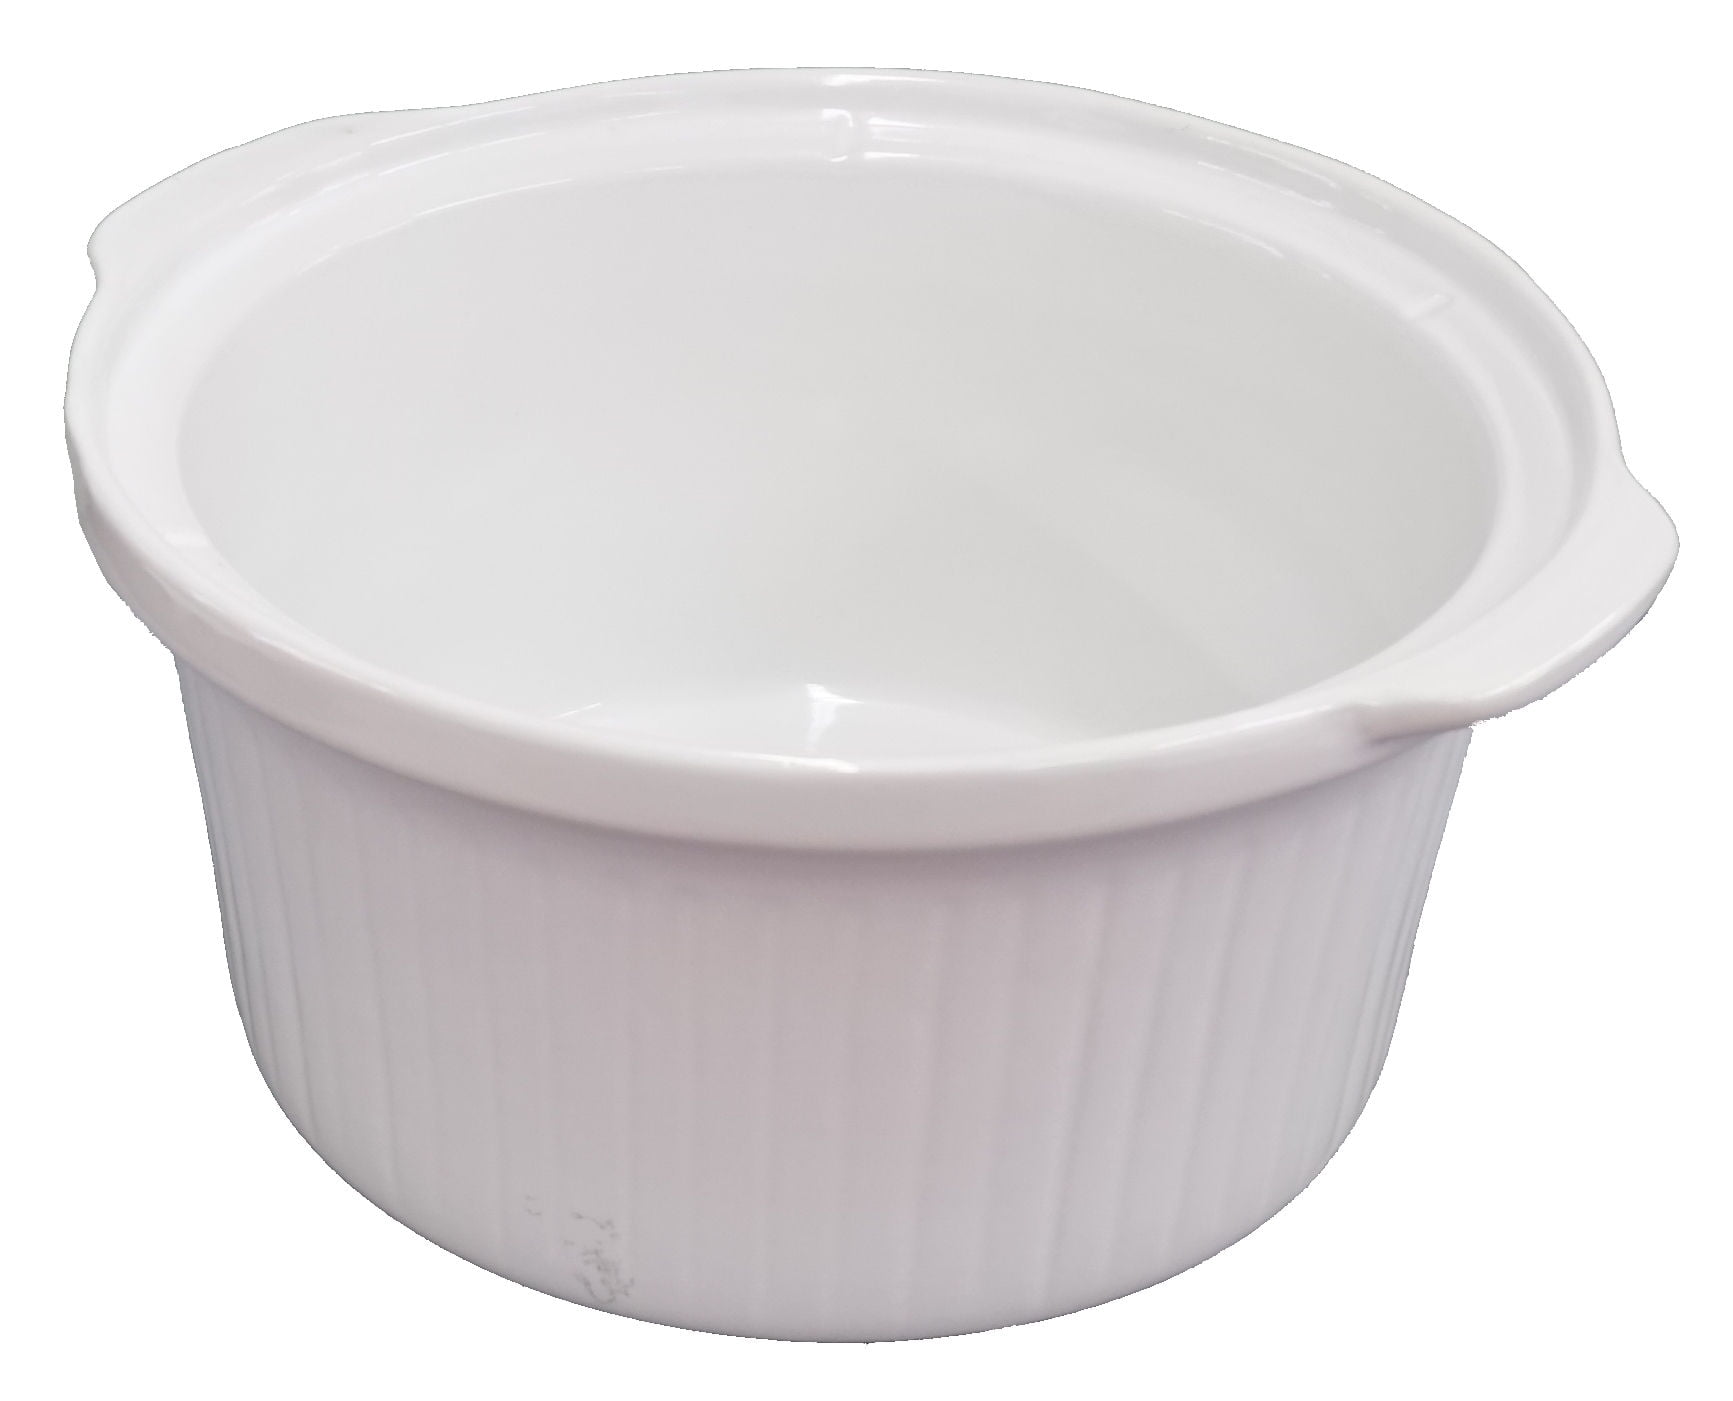 Rival Crock Pot Lid for Slow Cooker 5, 6 Quart to fit 3060-W 